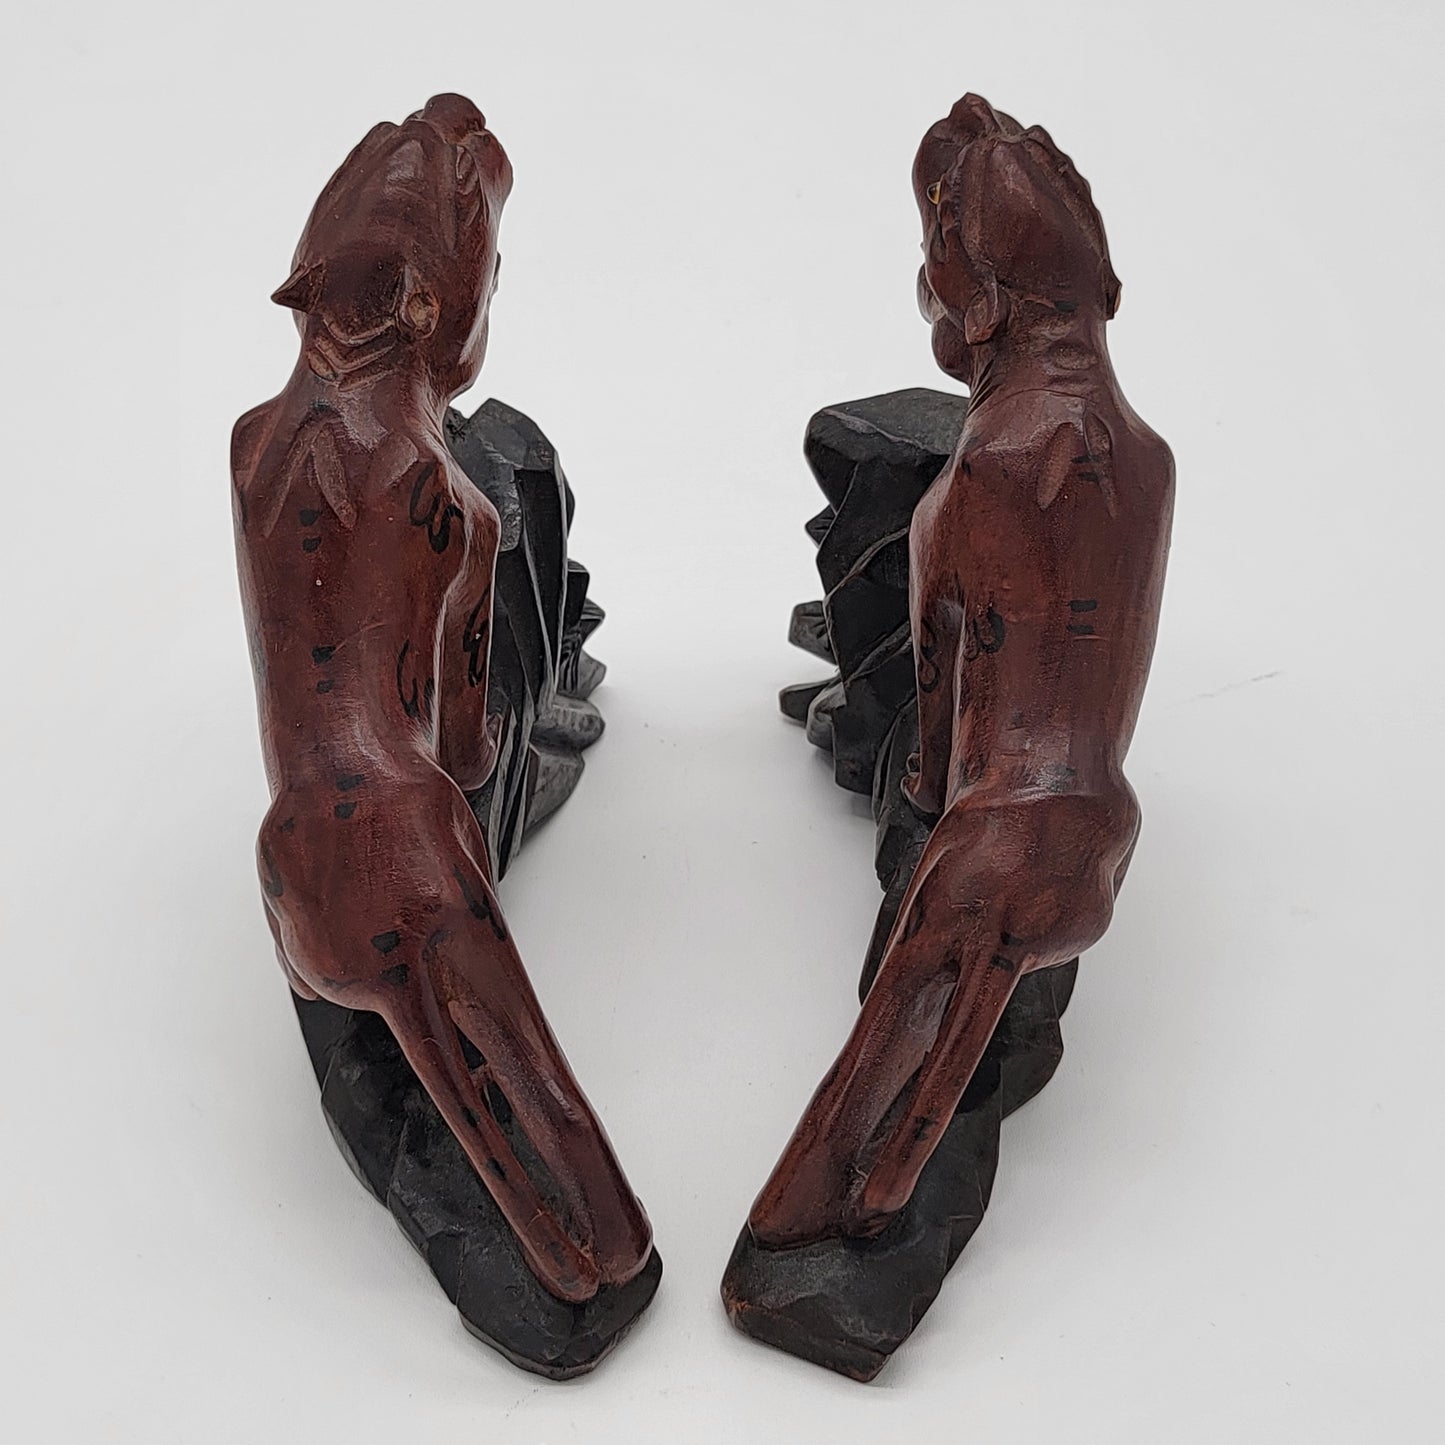 Pair of Antique Hand-Carved Rosewood Tigers with Glass Eyes